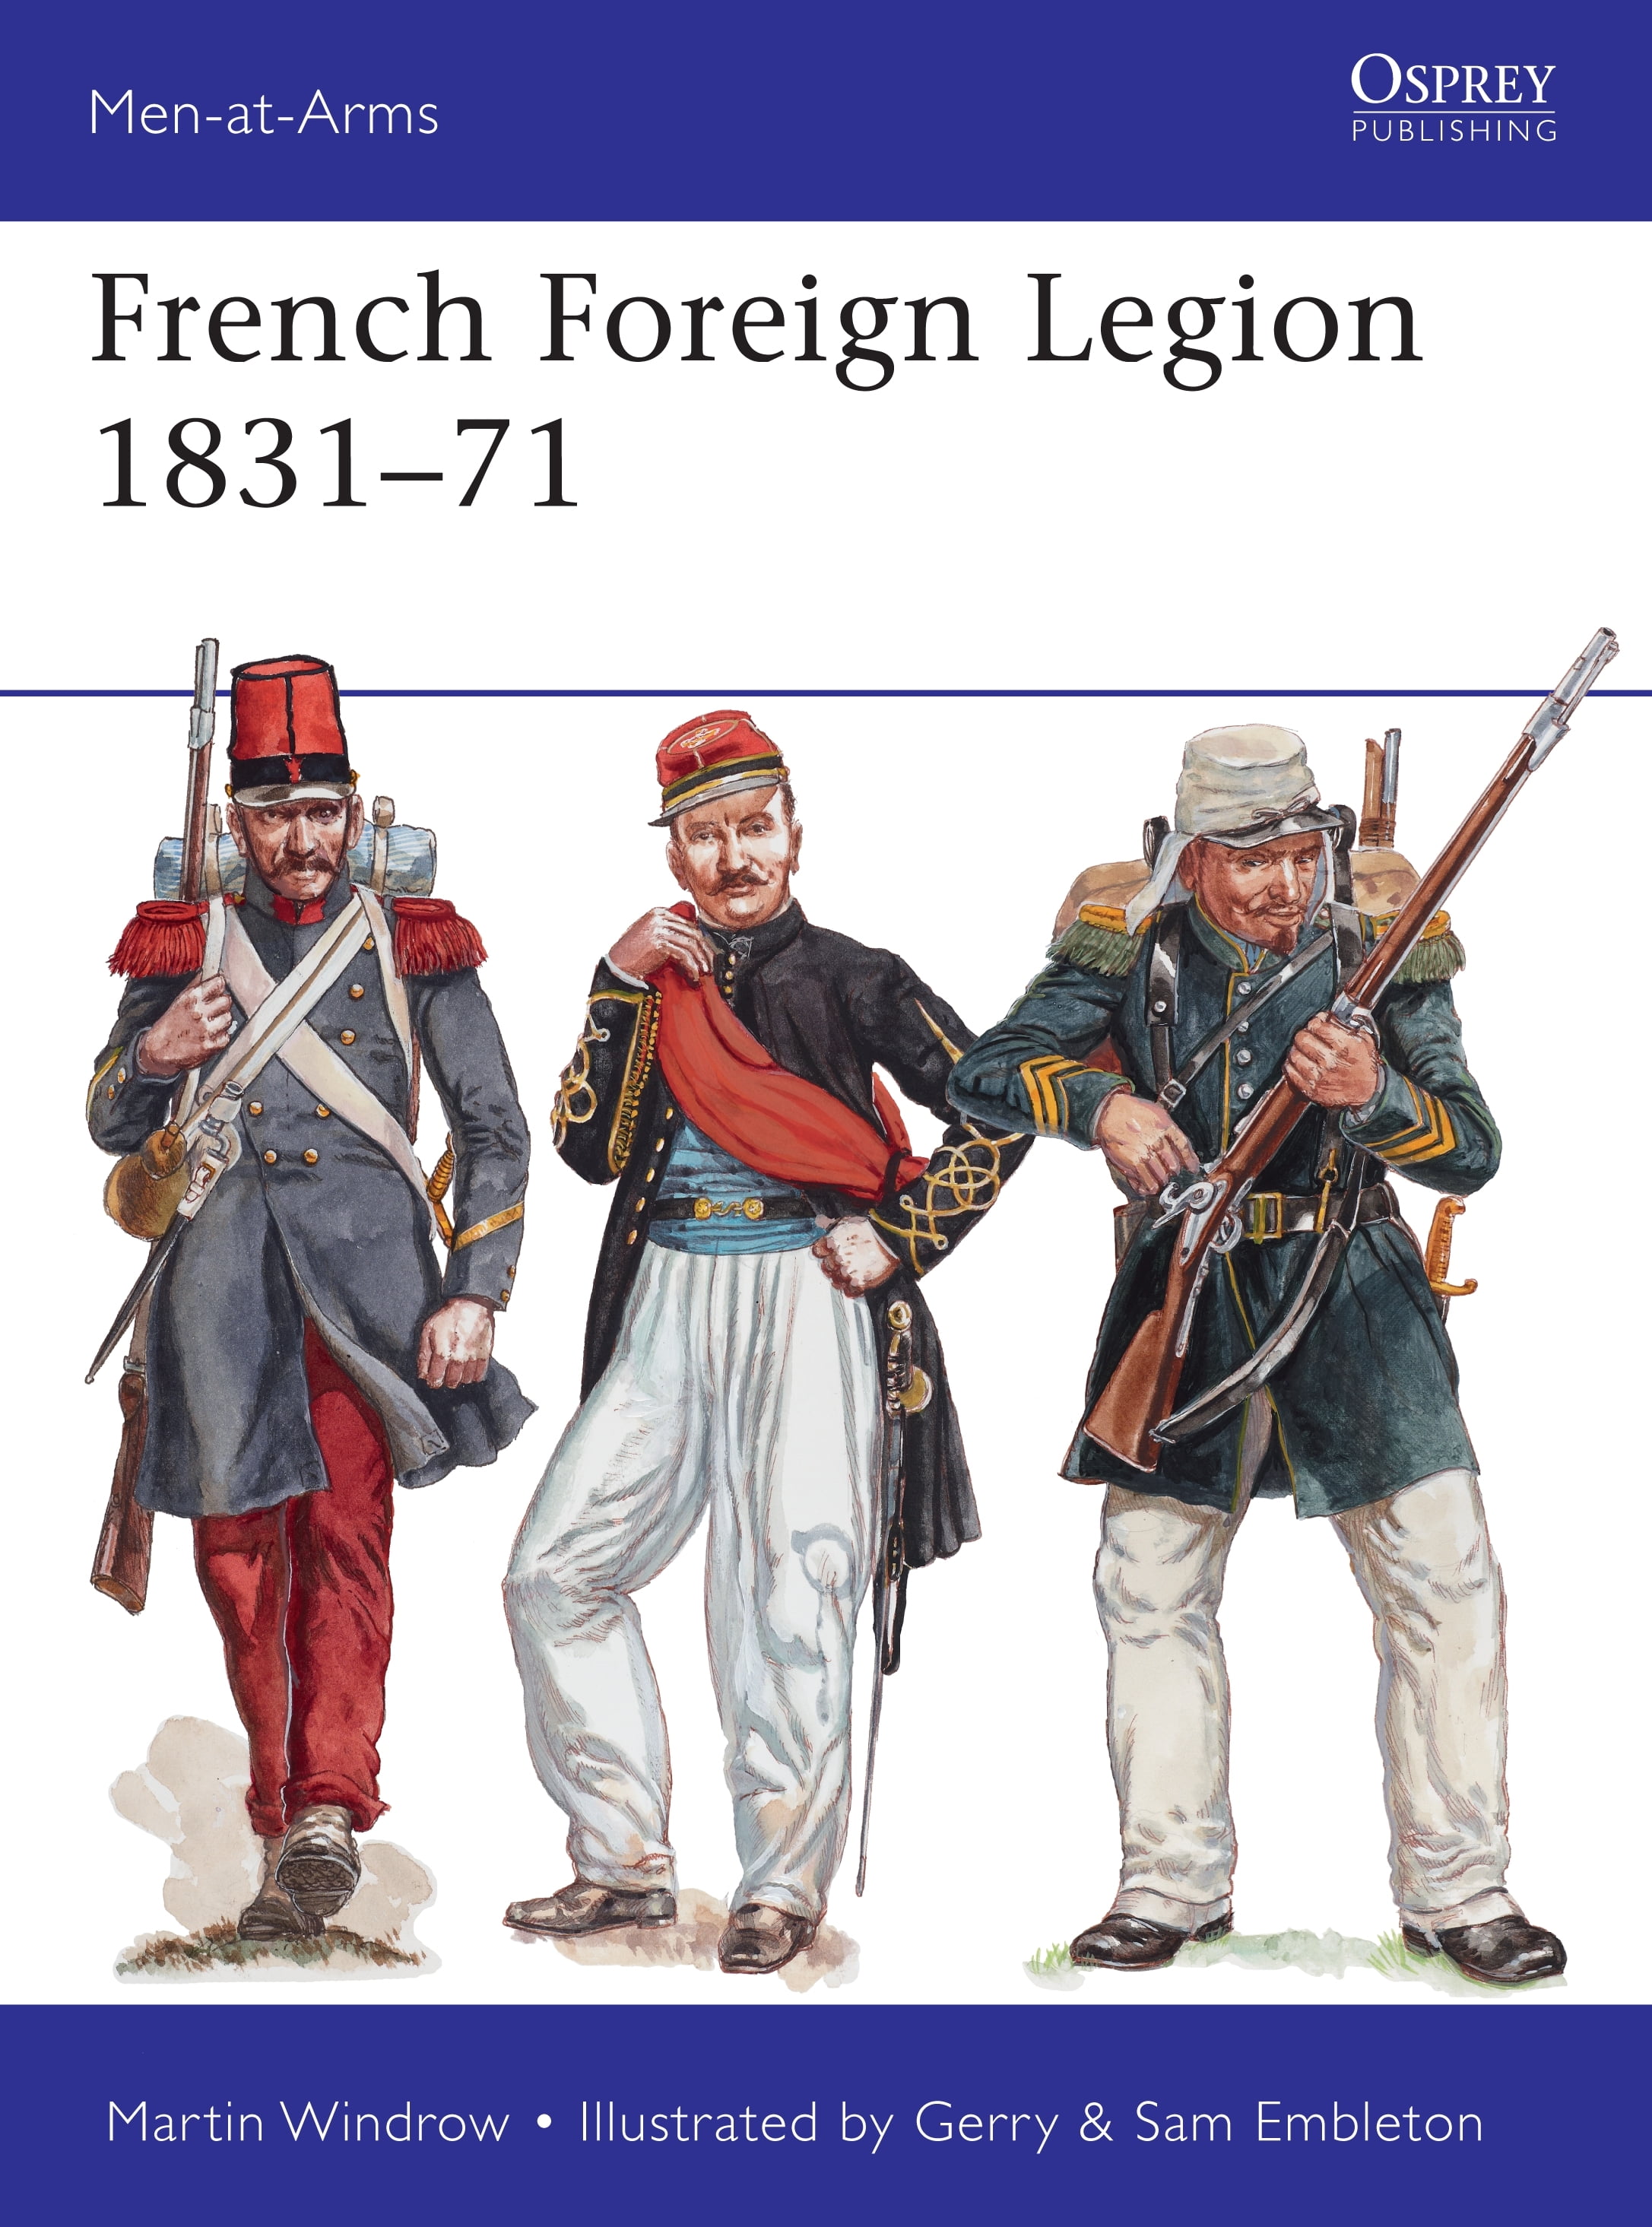 Vintage French Foreign Legion Book Cover  Poster A3 Print